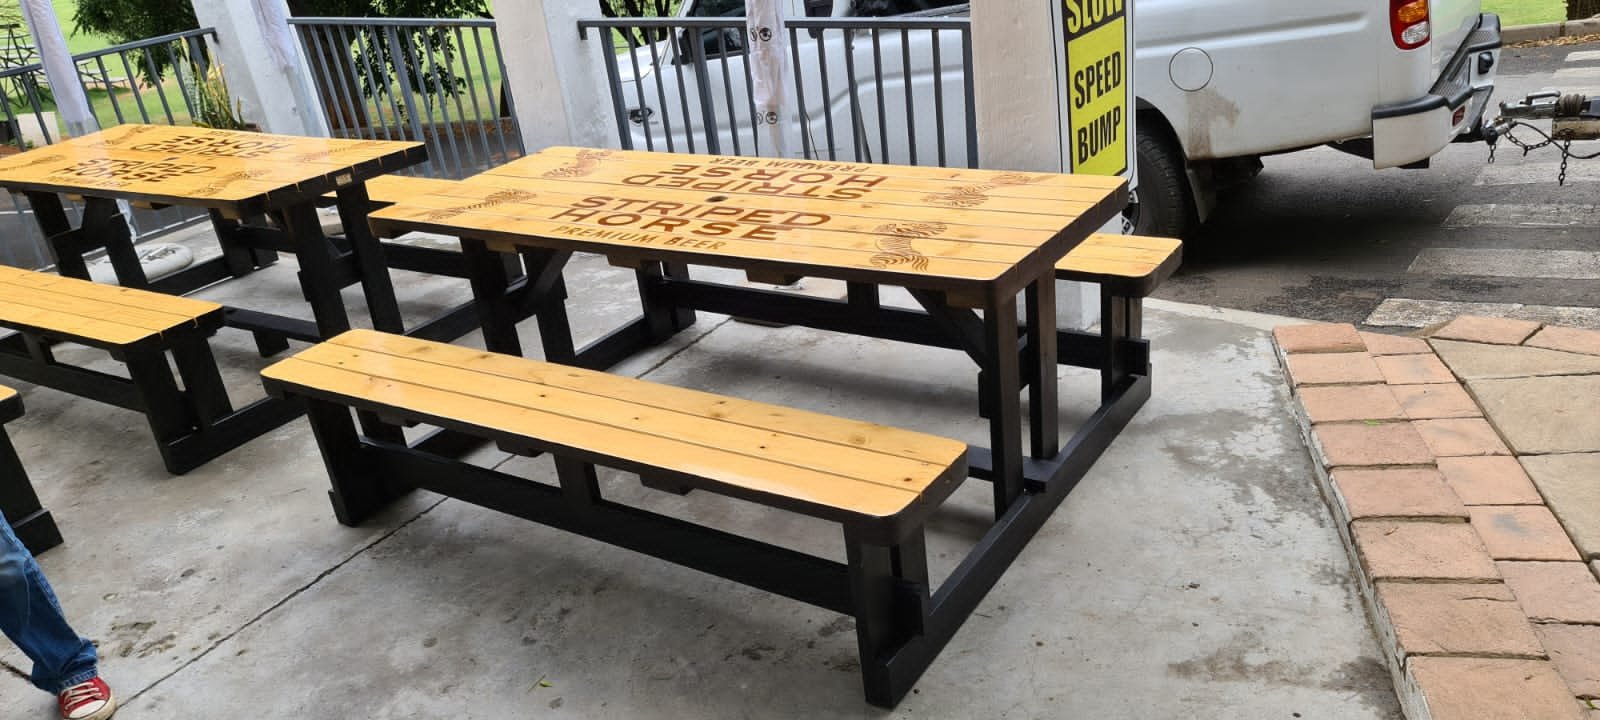 Restaurant Benches and Table